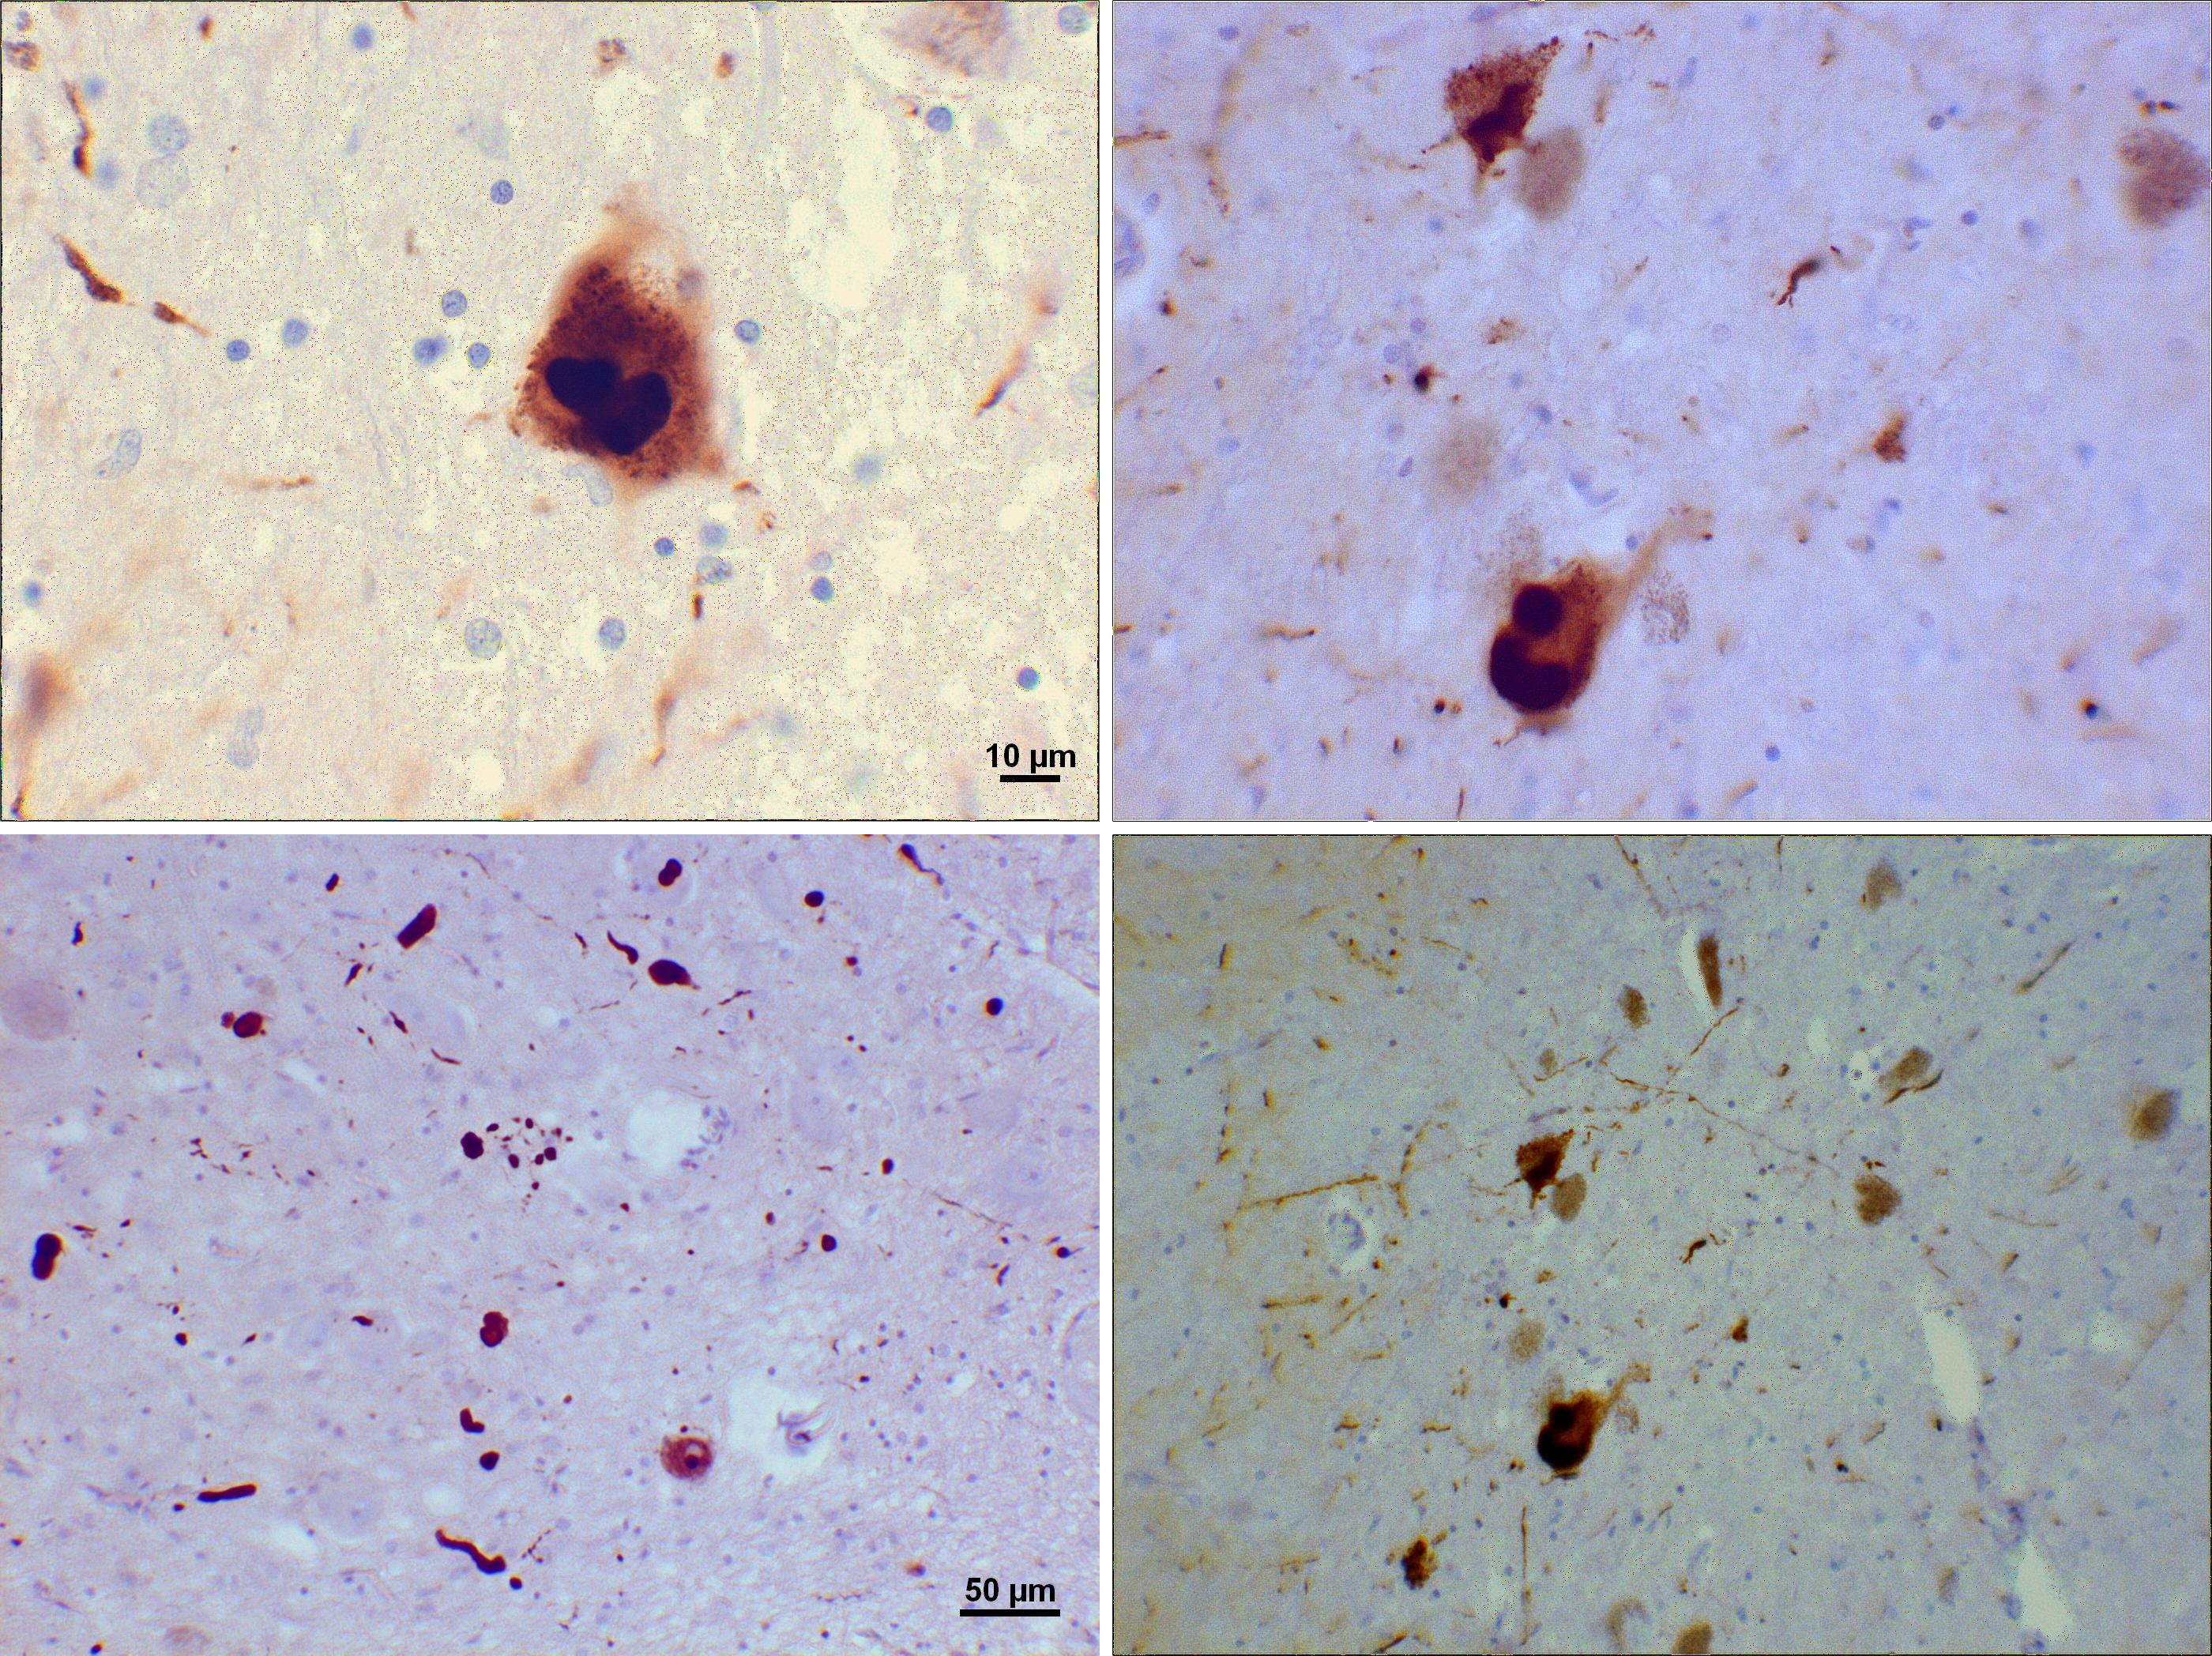 File:Lewy bodies (alpha synuclein inclusions).jpg